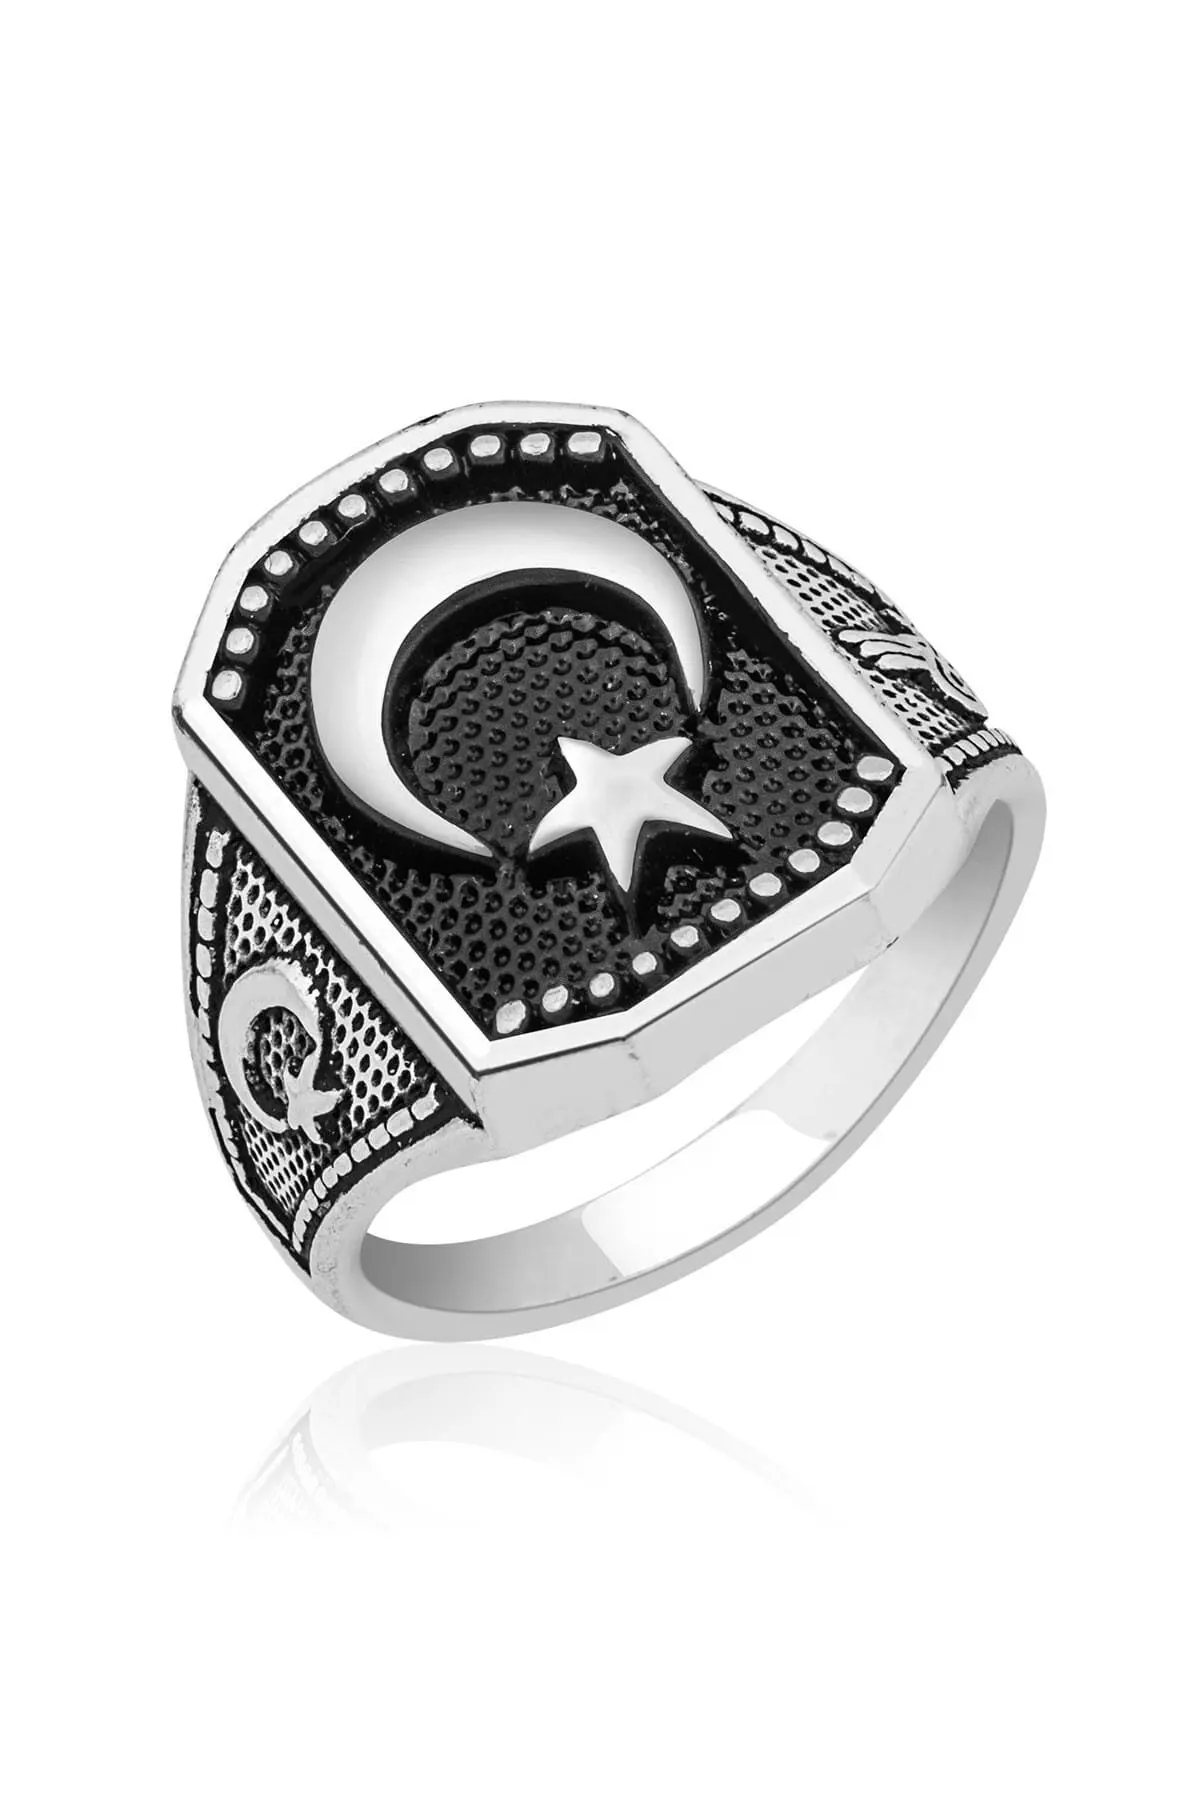 

Metal Plated Silver Look Men's Ring Jewelry Accessories Moon Yildiz Turkey Elegant Daily Use Ottoman Tugra Stylish Design Does